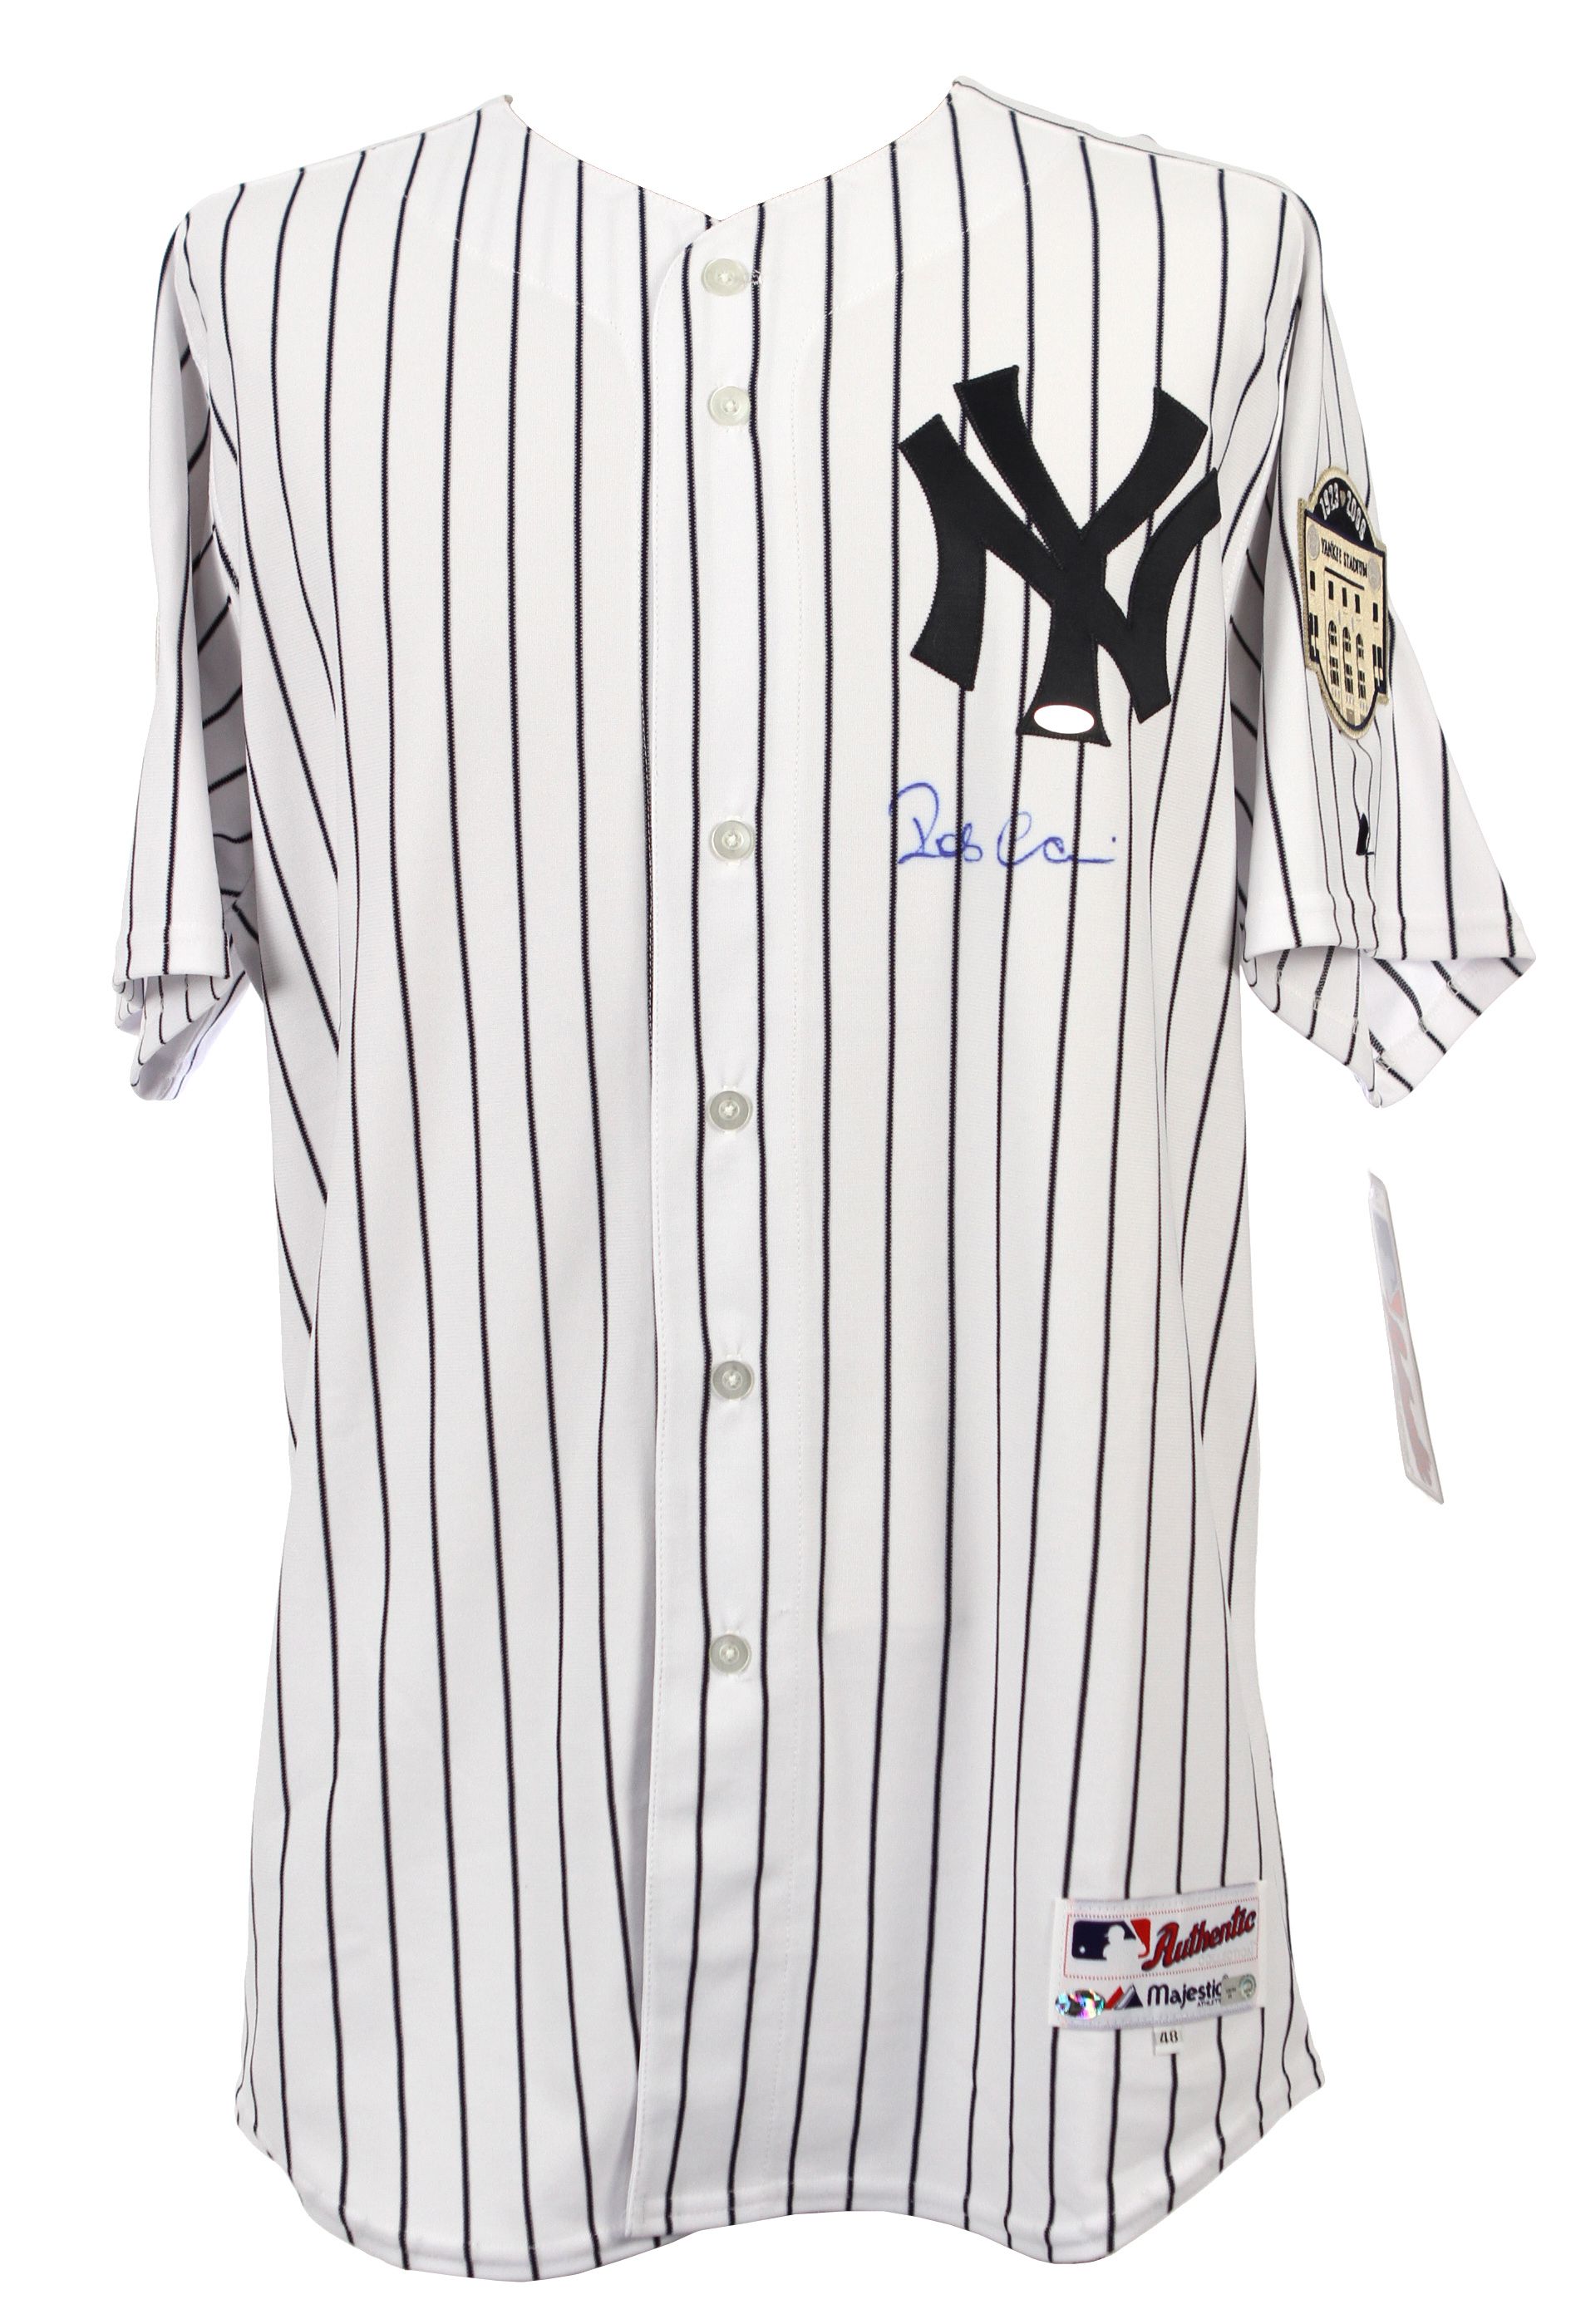 2008 mlb all star game jersey